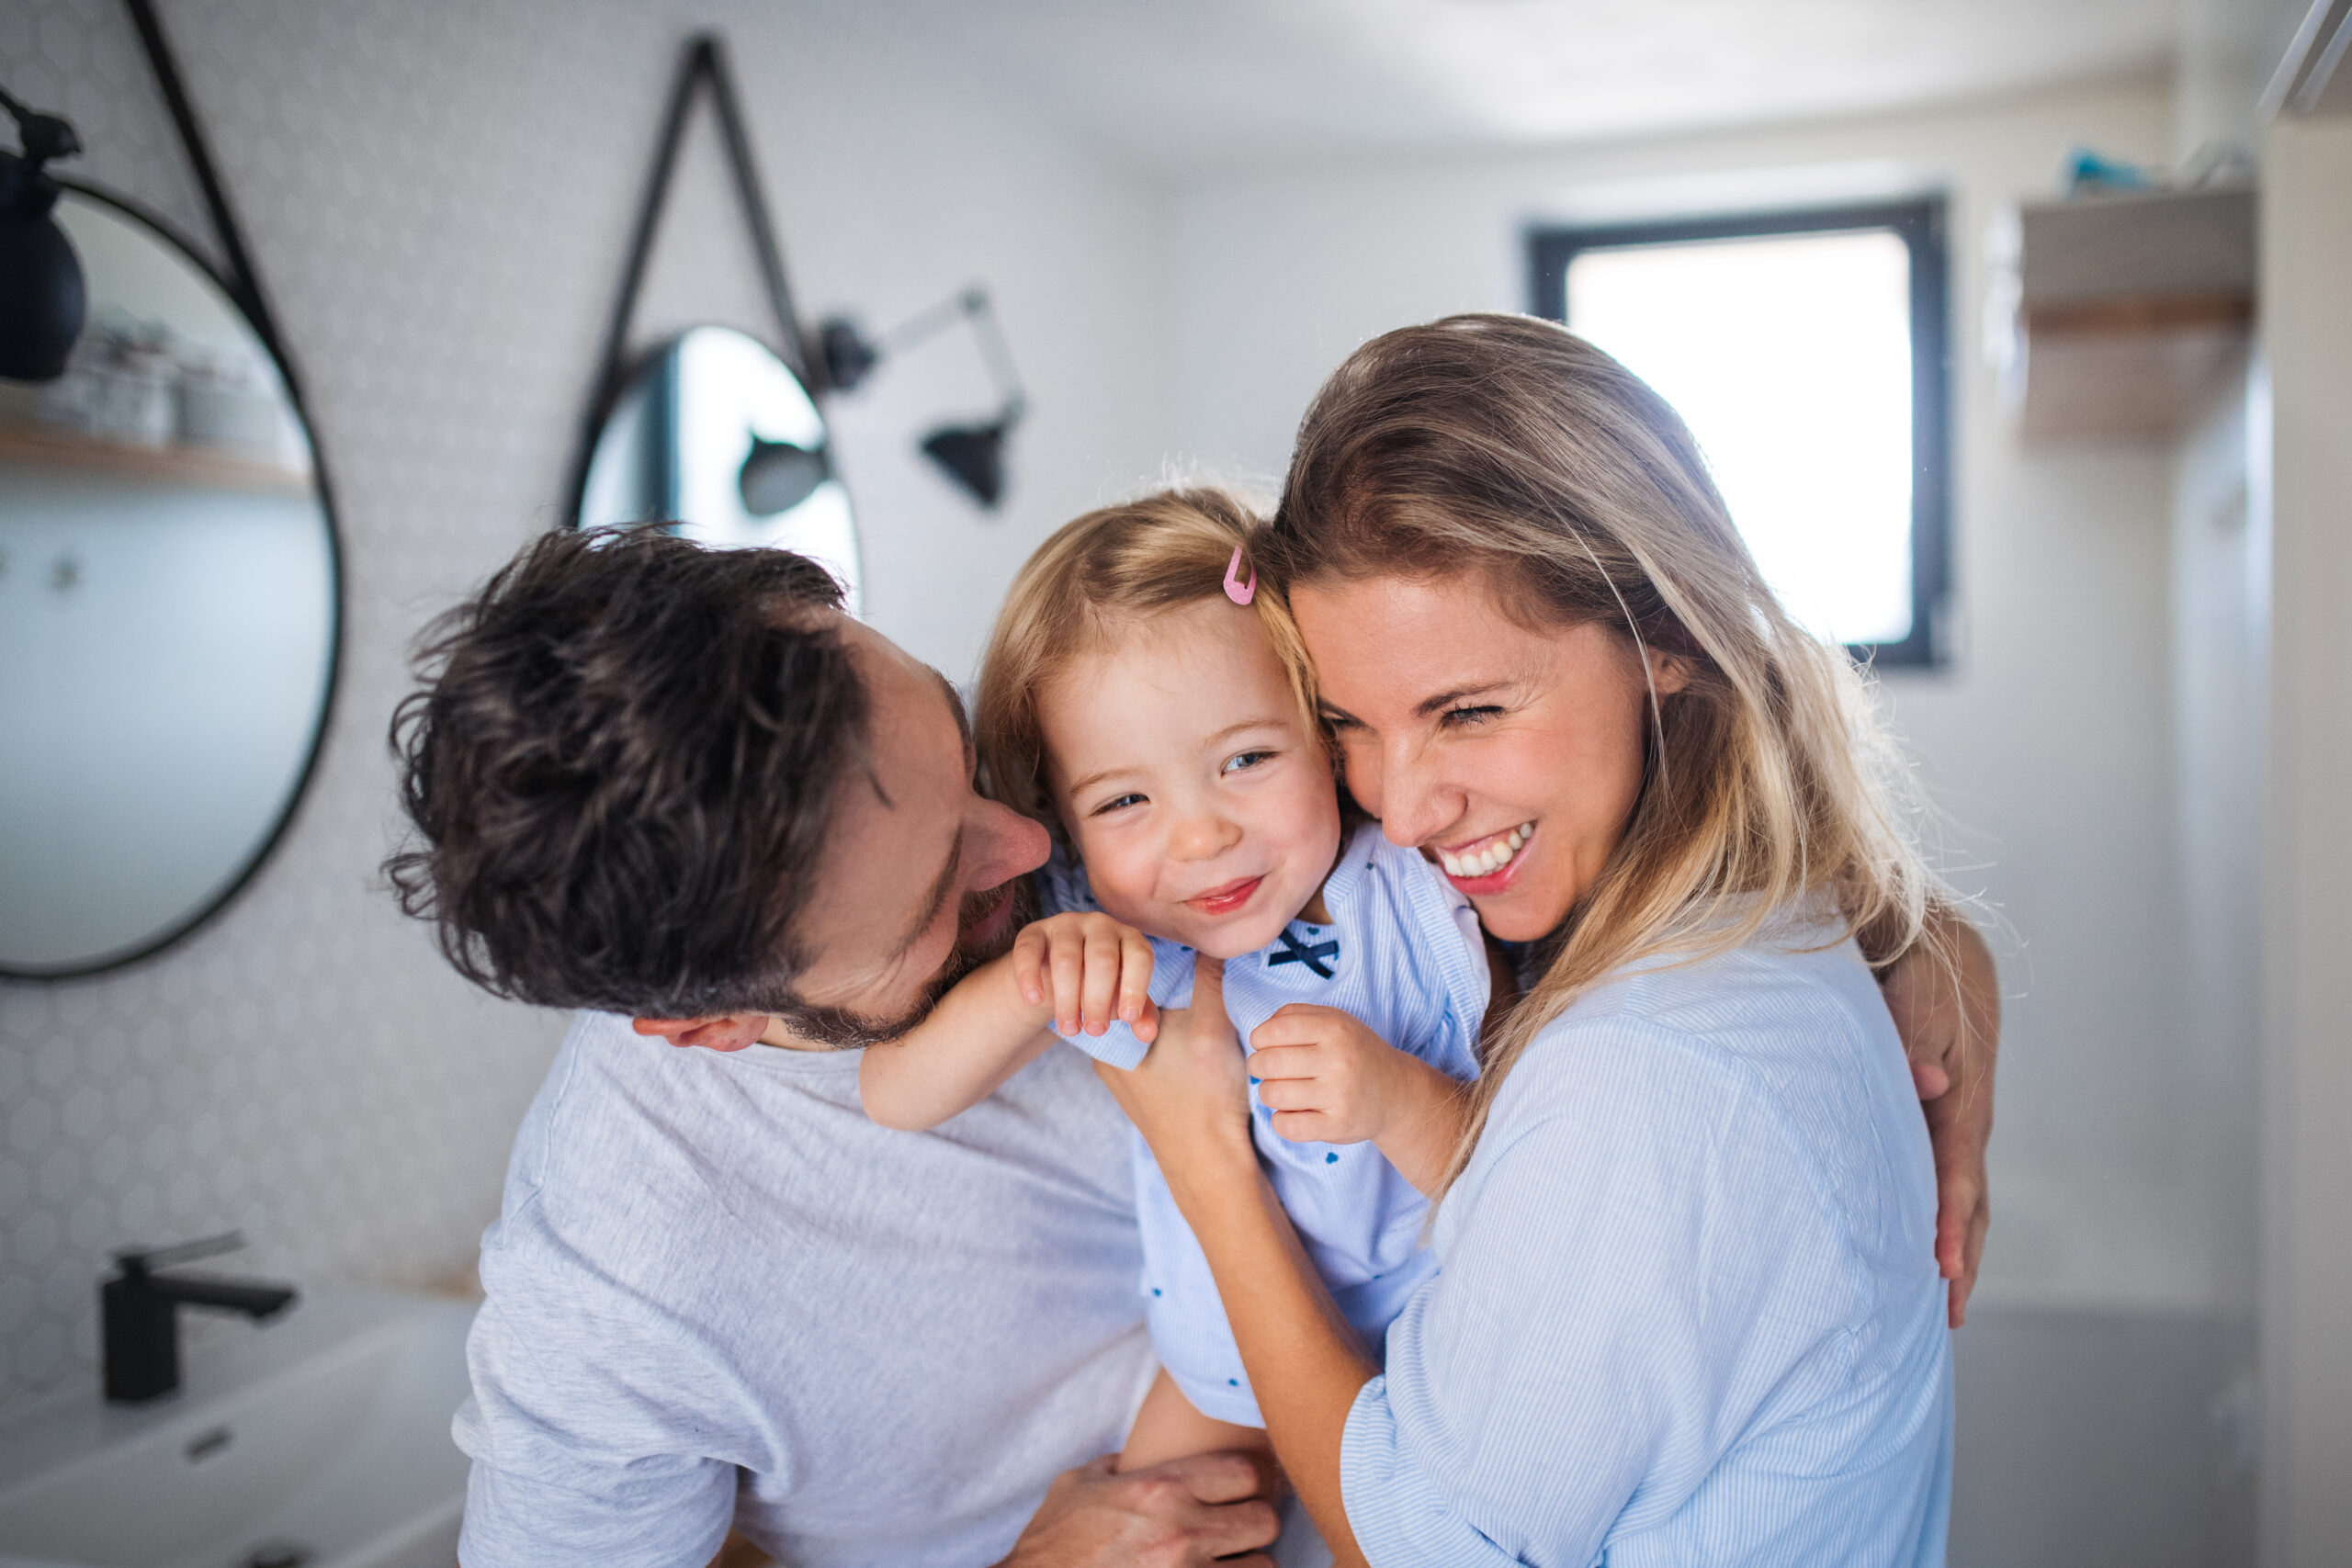 A young family with small daughter indoors in bathroom, hugging.